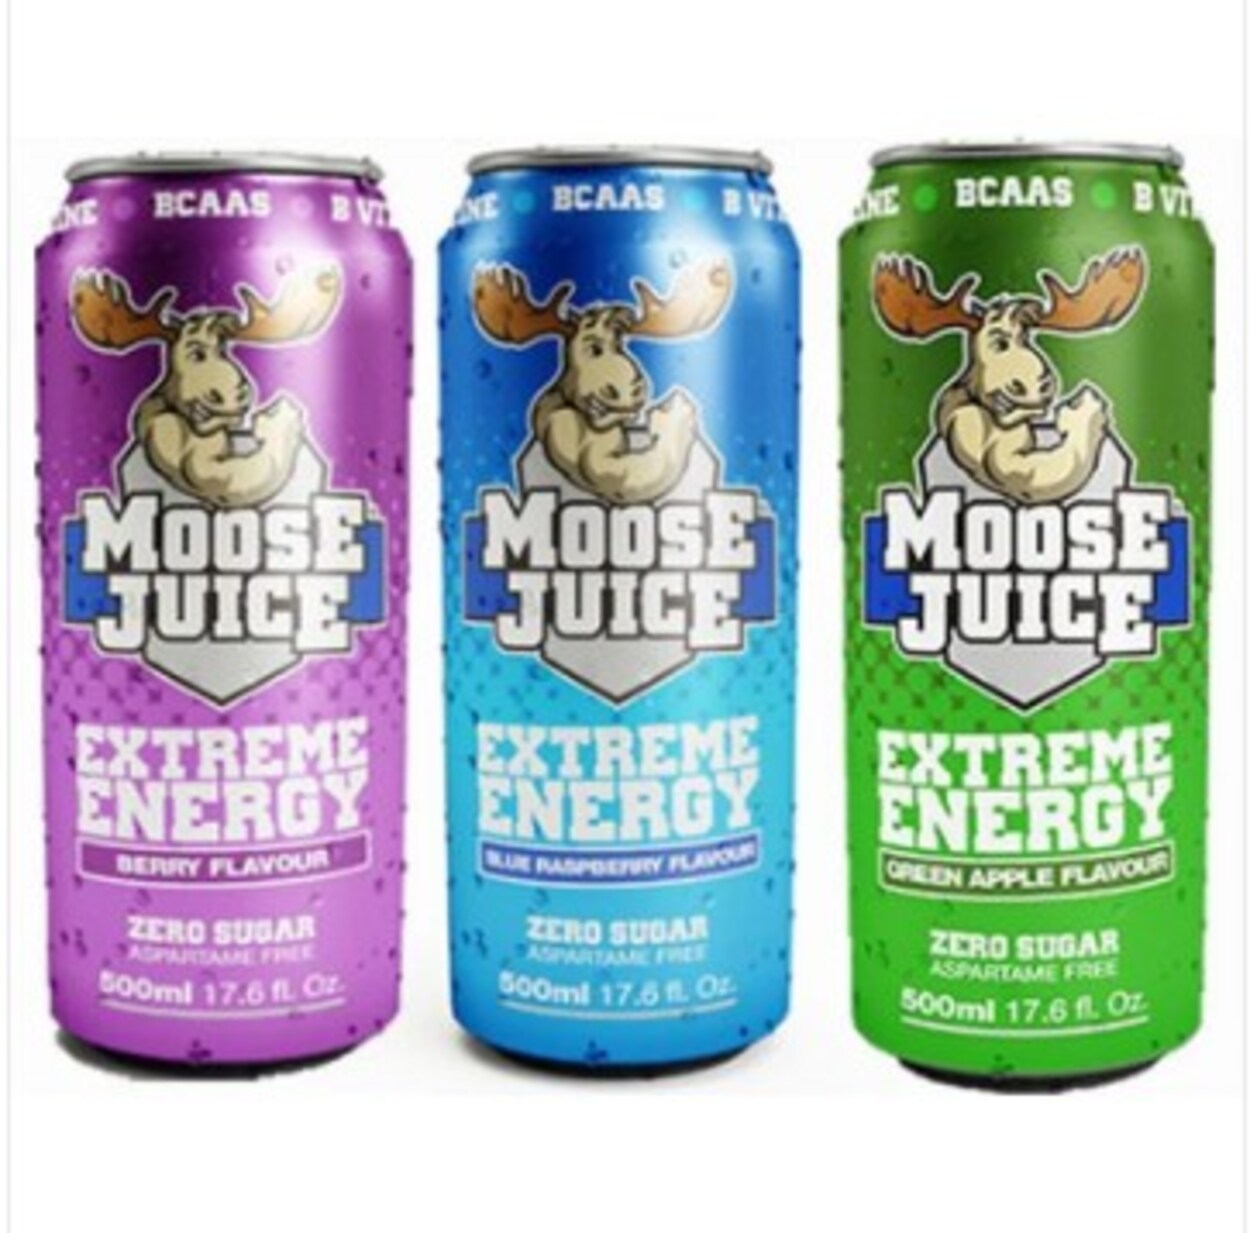 Vegan or Not? The Truth About Moose Juice Energy Drink